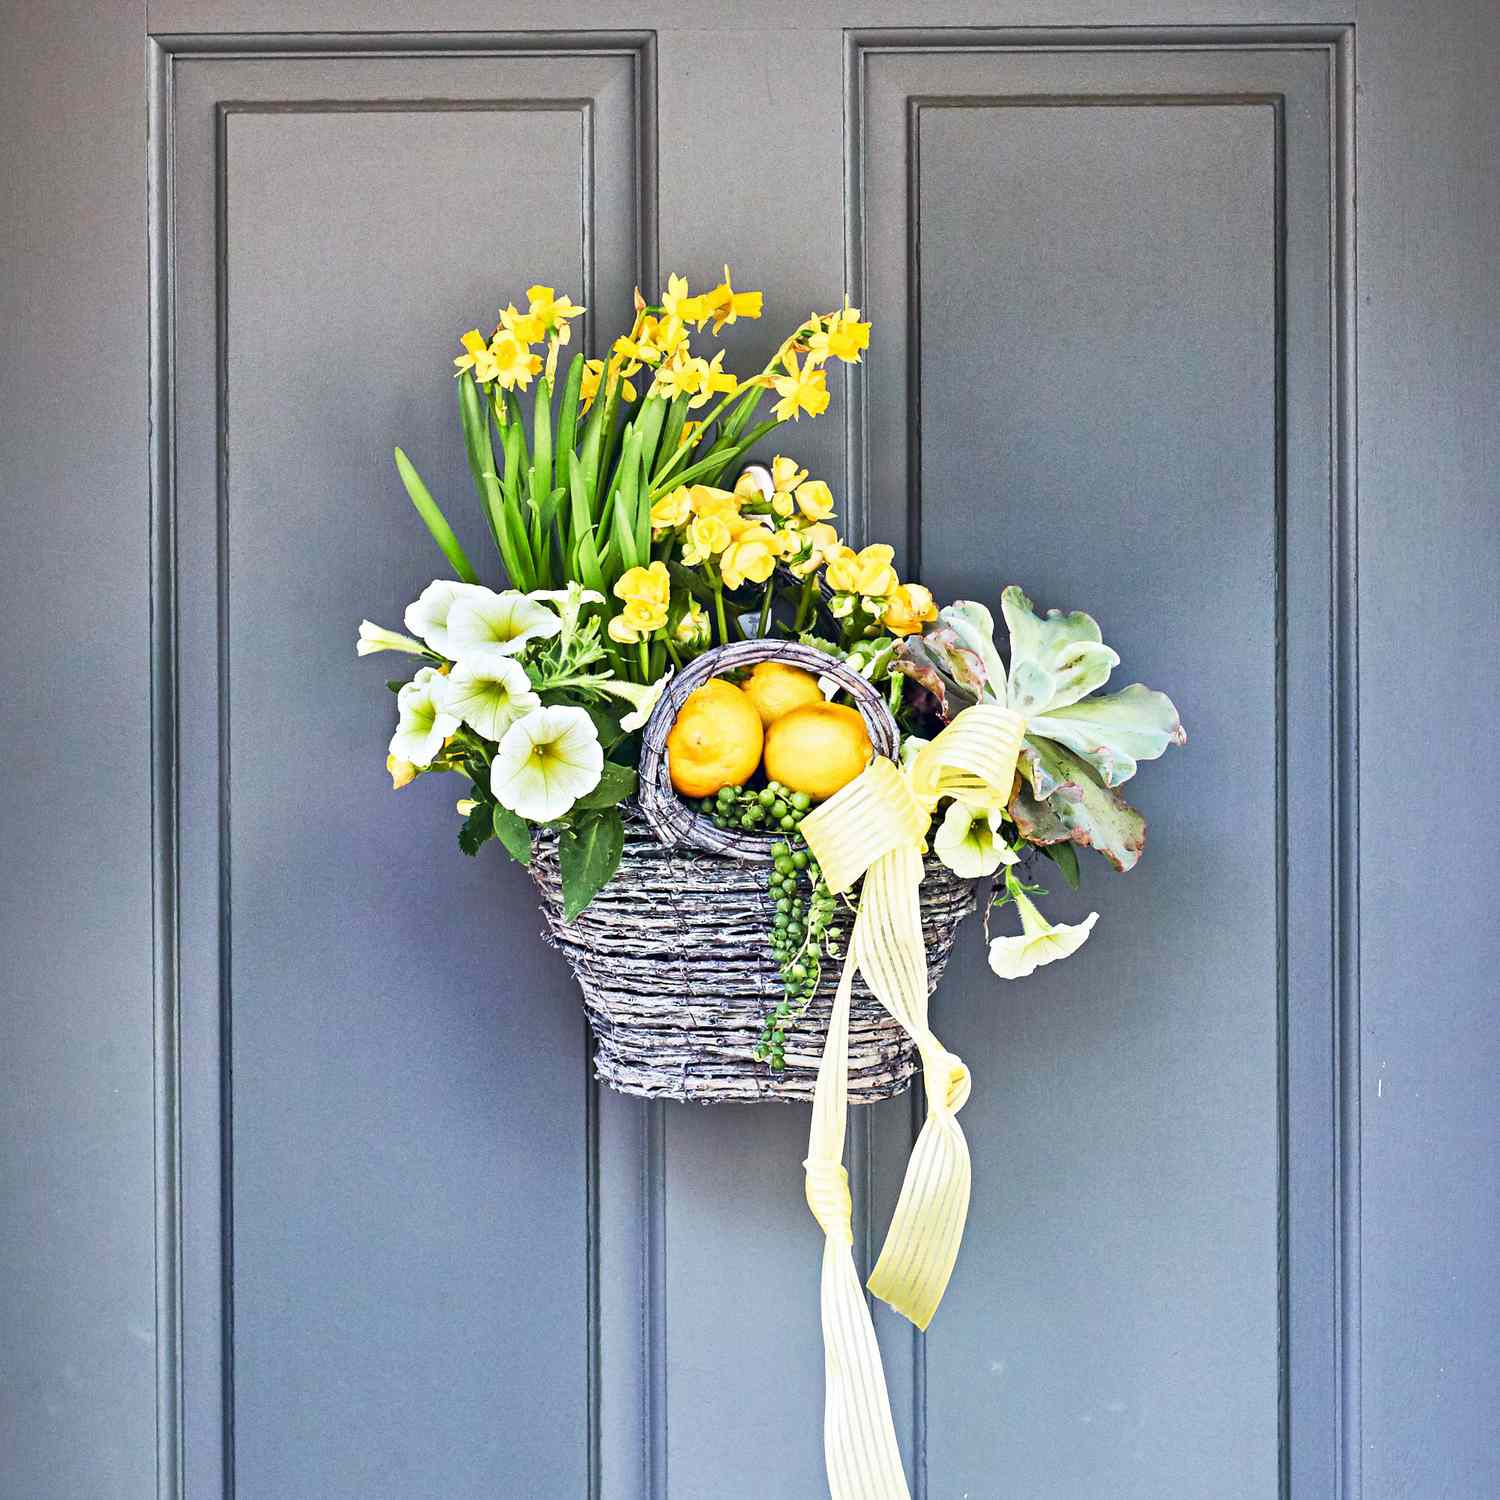 Hanging basket on front door with daffodils, violas, and succulents